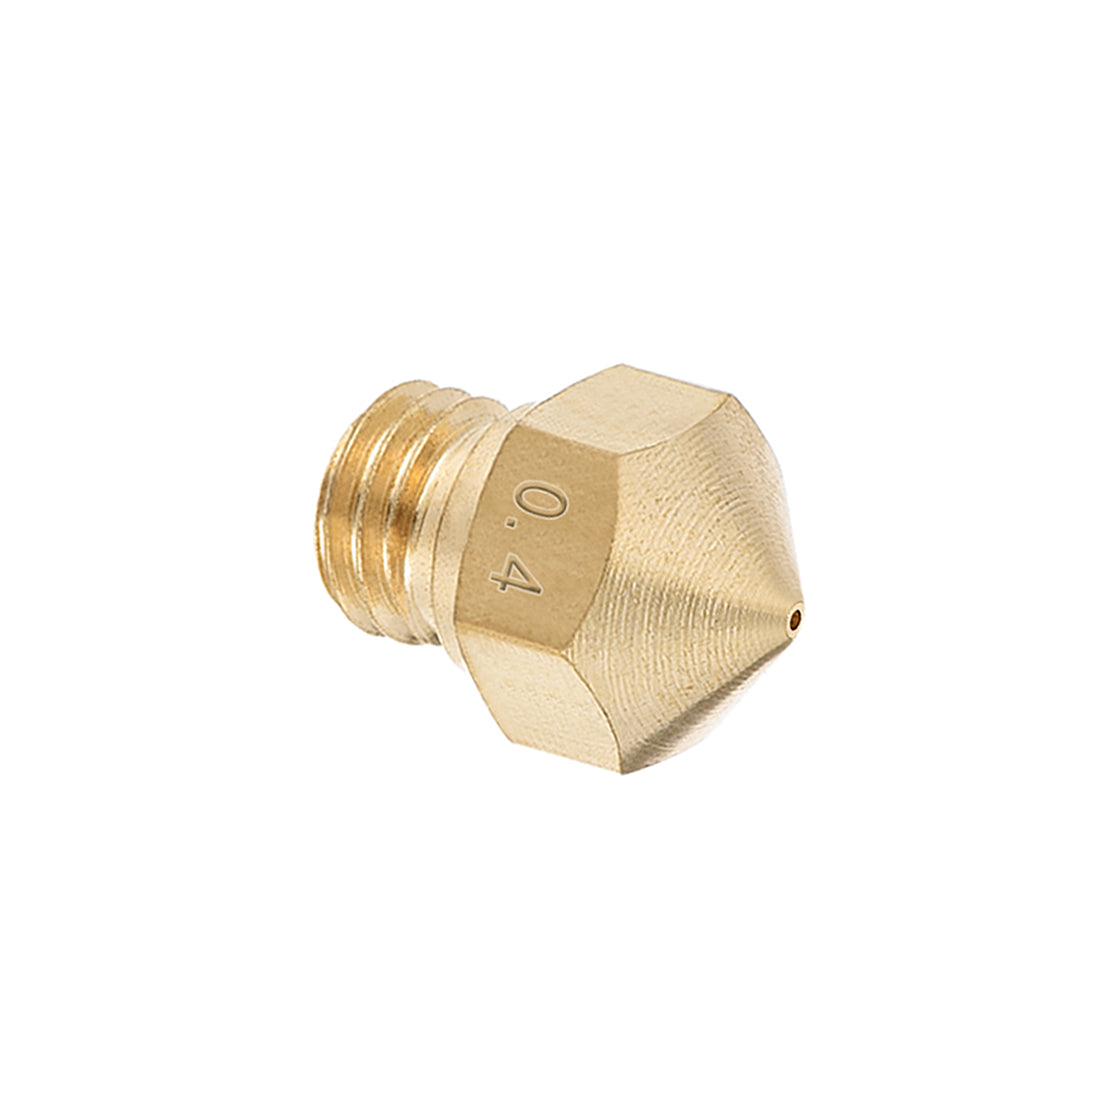 uxcell Uxcell 0.4mm 3D Printer Nozzle, Fit for MK10, for 1.75mm Filament Brass 2pcs